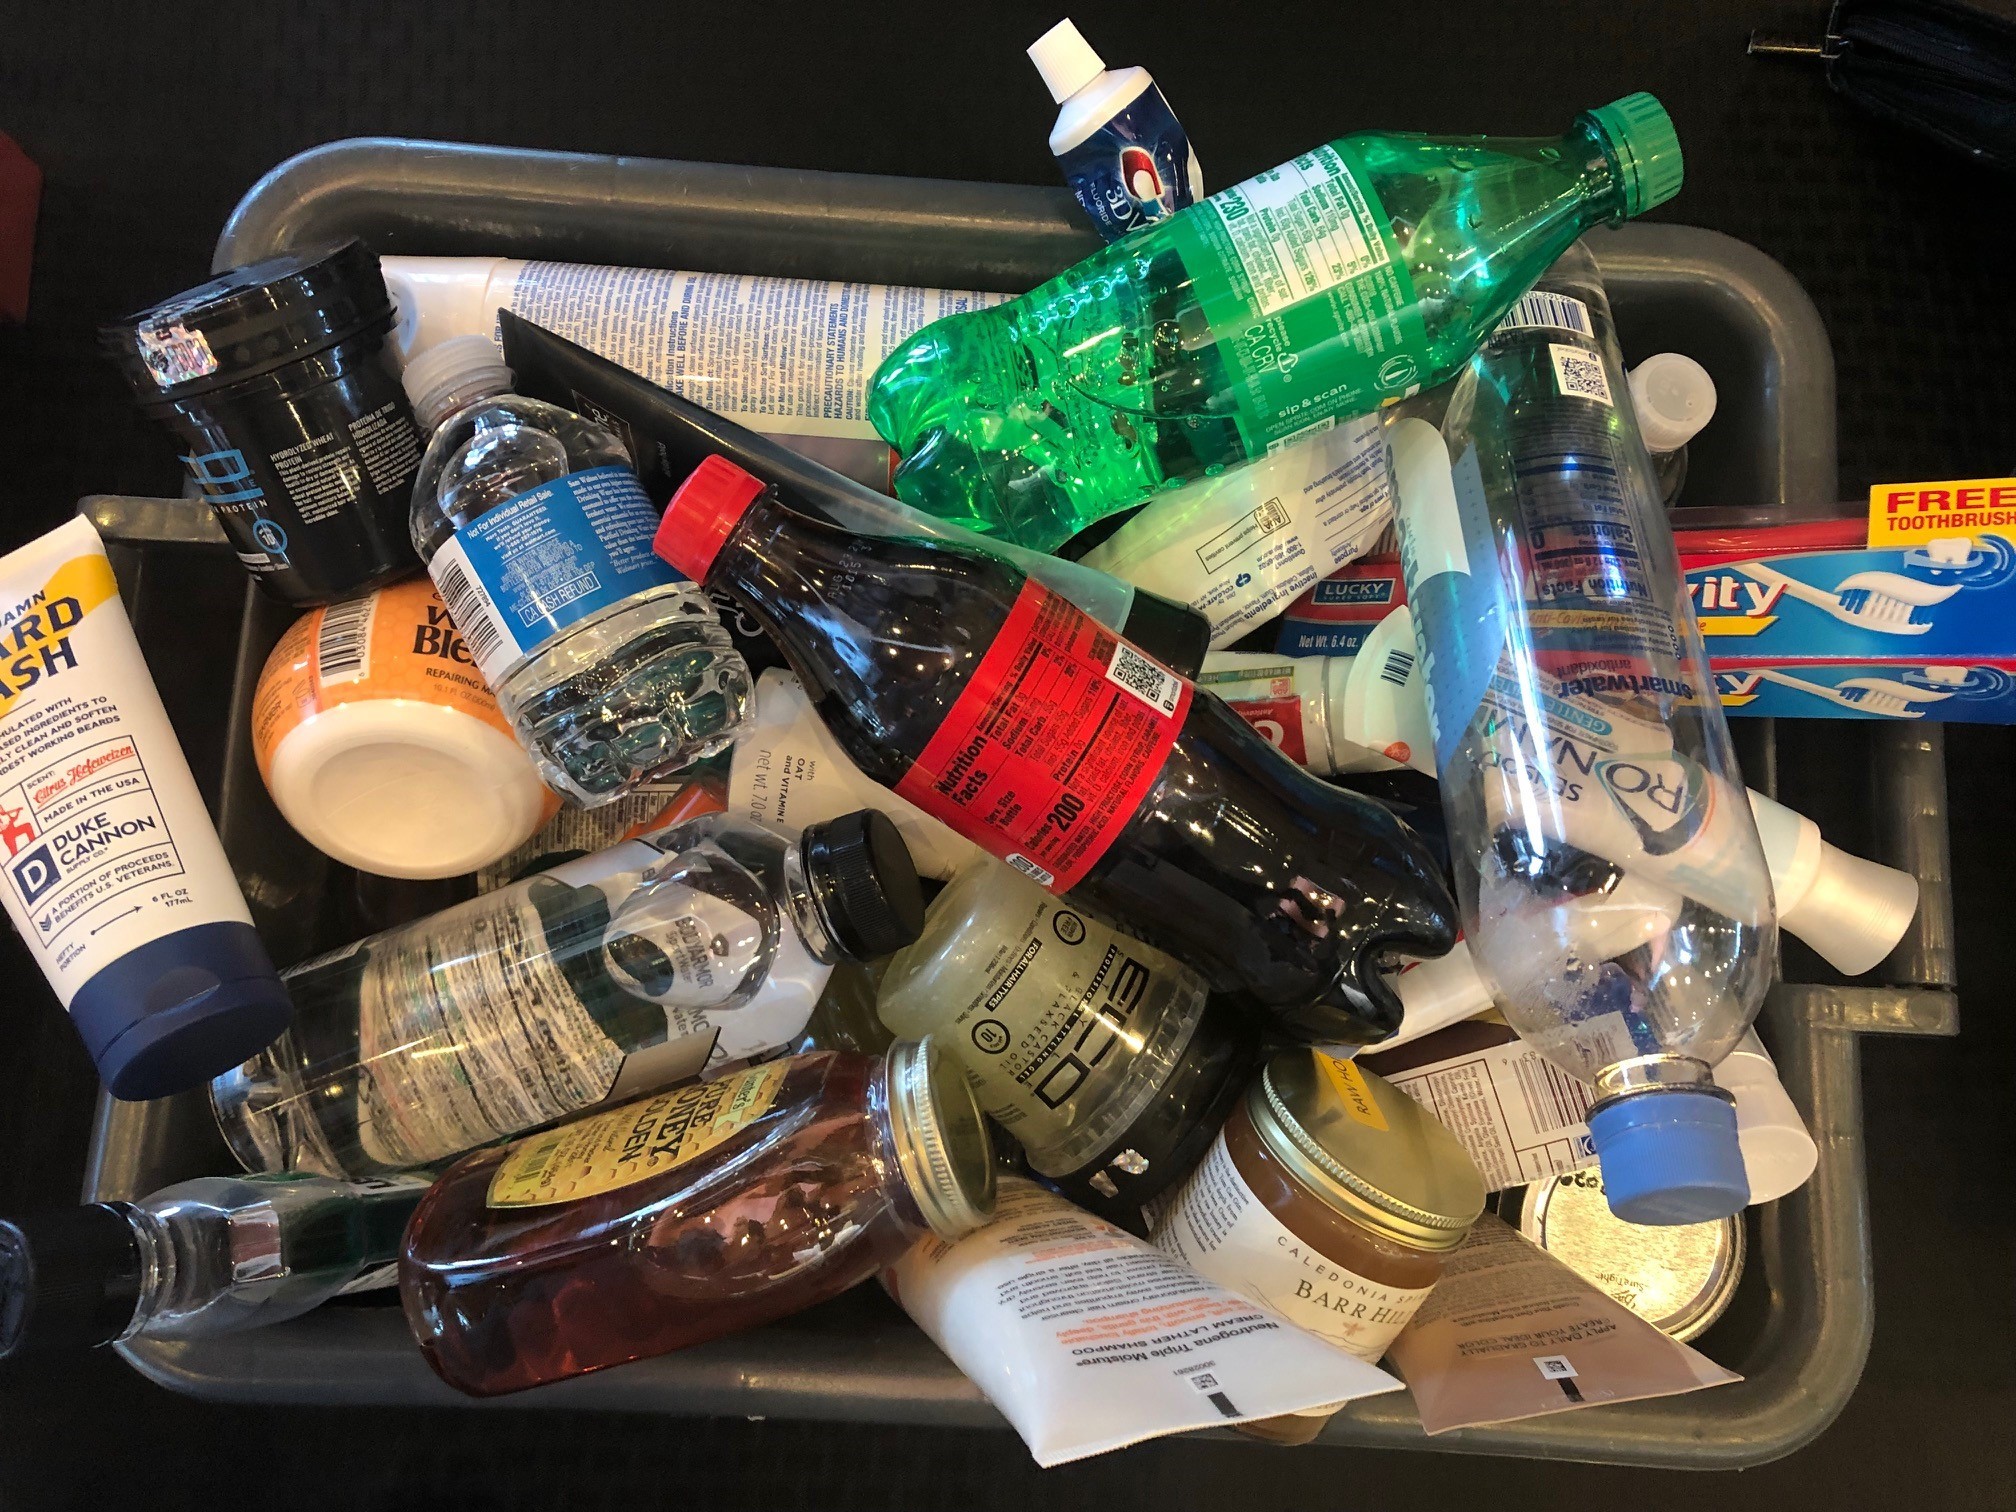 Travelers are not permitted to bring liquids, gels or aerosols larger than 3.4 ounces through a security checkpoint. The items pictured here have been surrendered by travelers at checkpoints. (TSA photo)